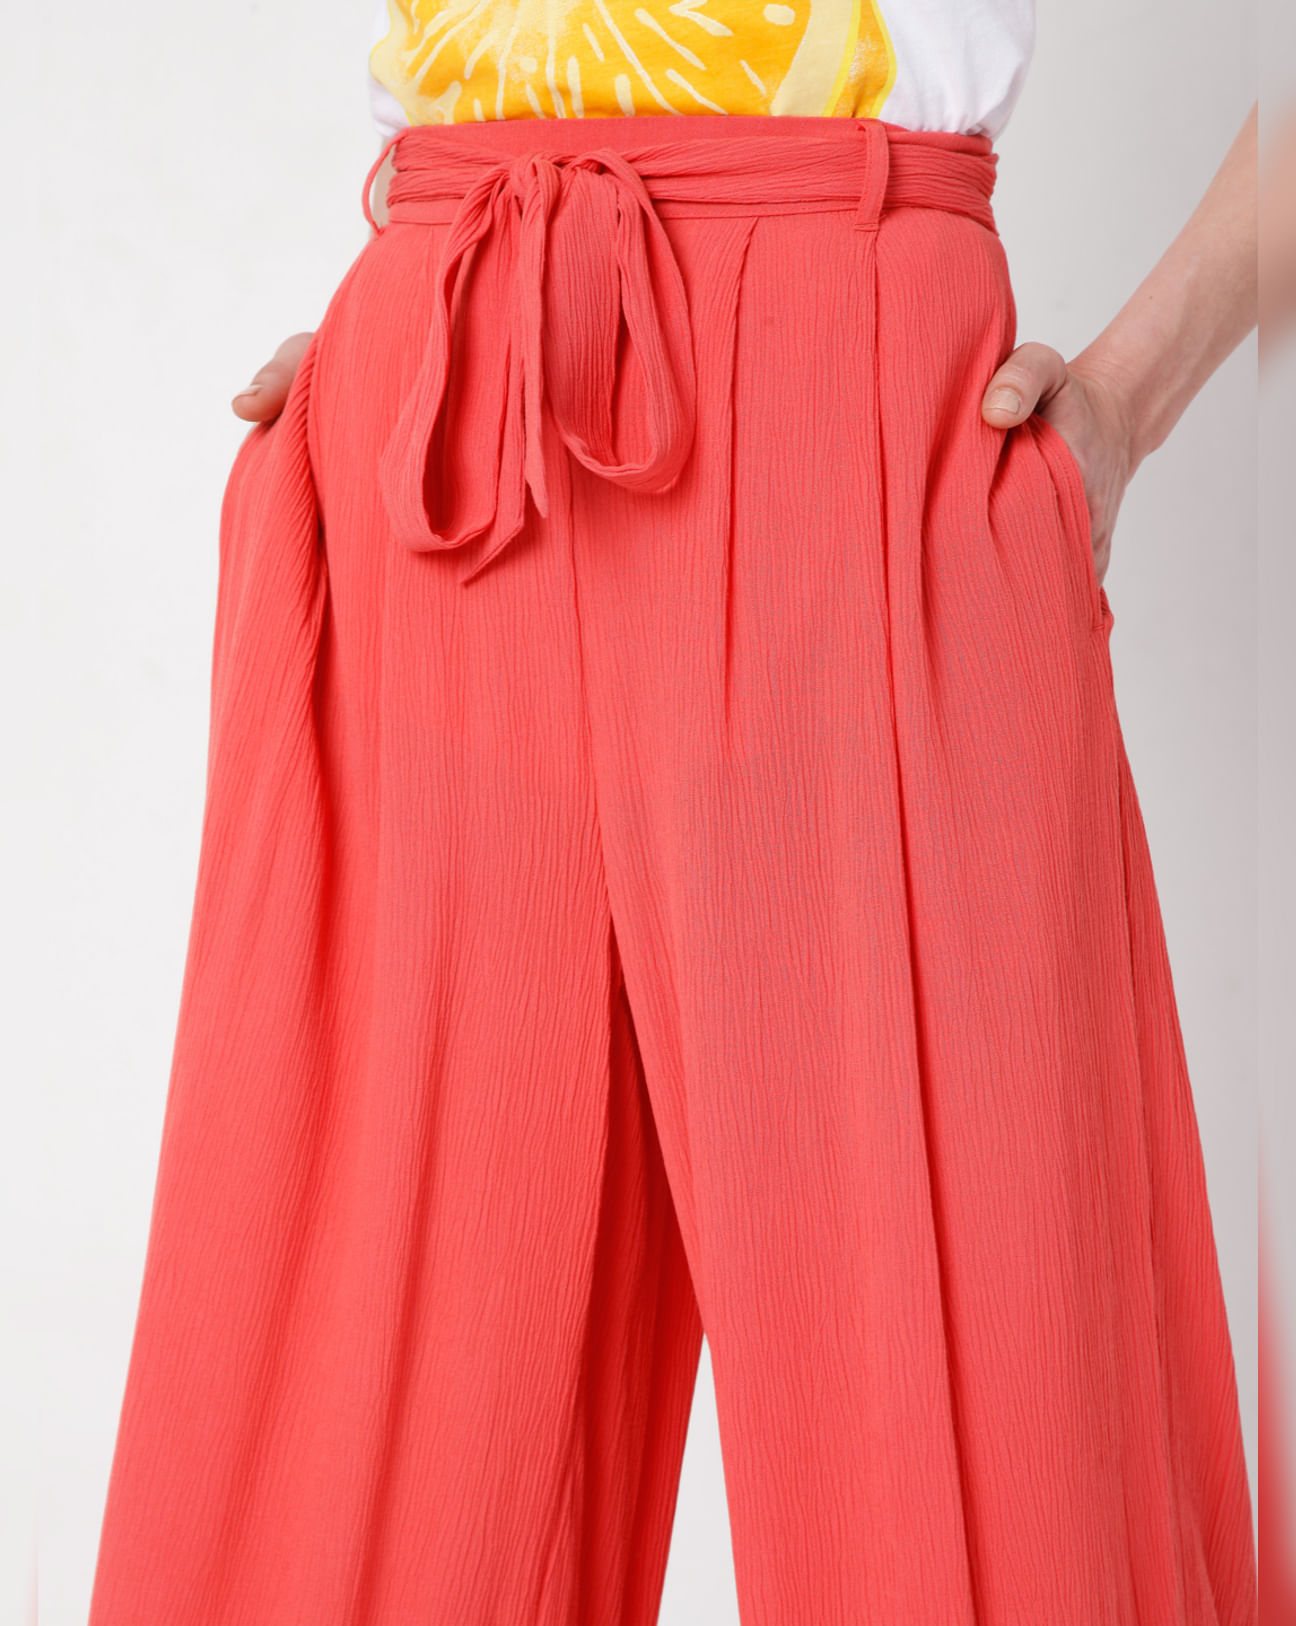 Coral loose fit elastic waistband leisure pants